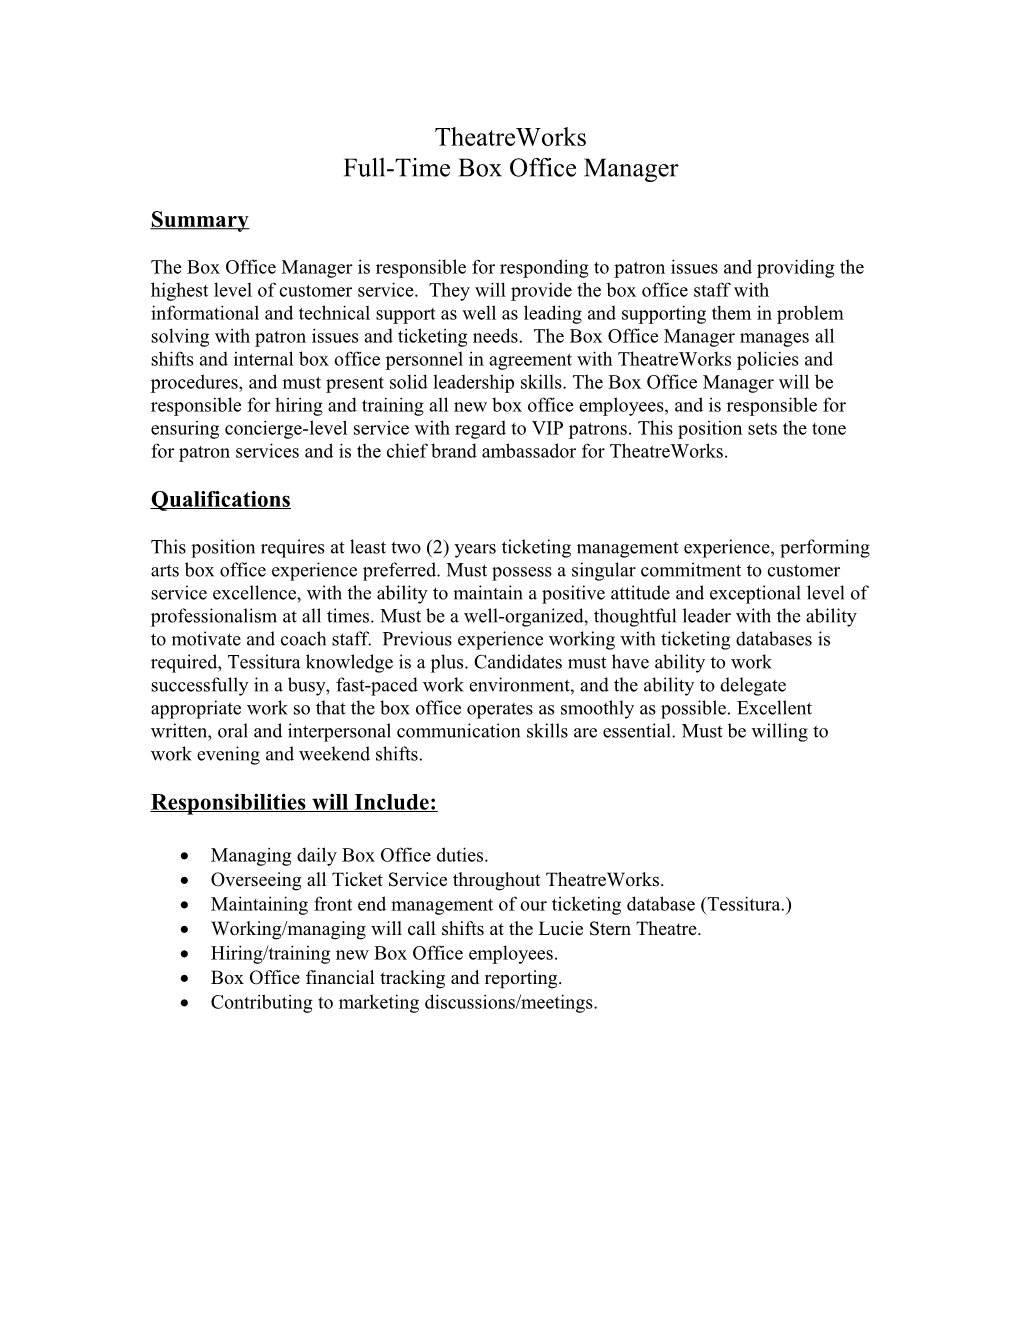 Full-Time Box Office Manager